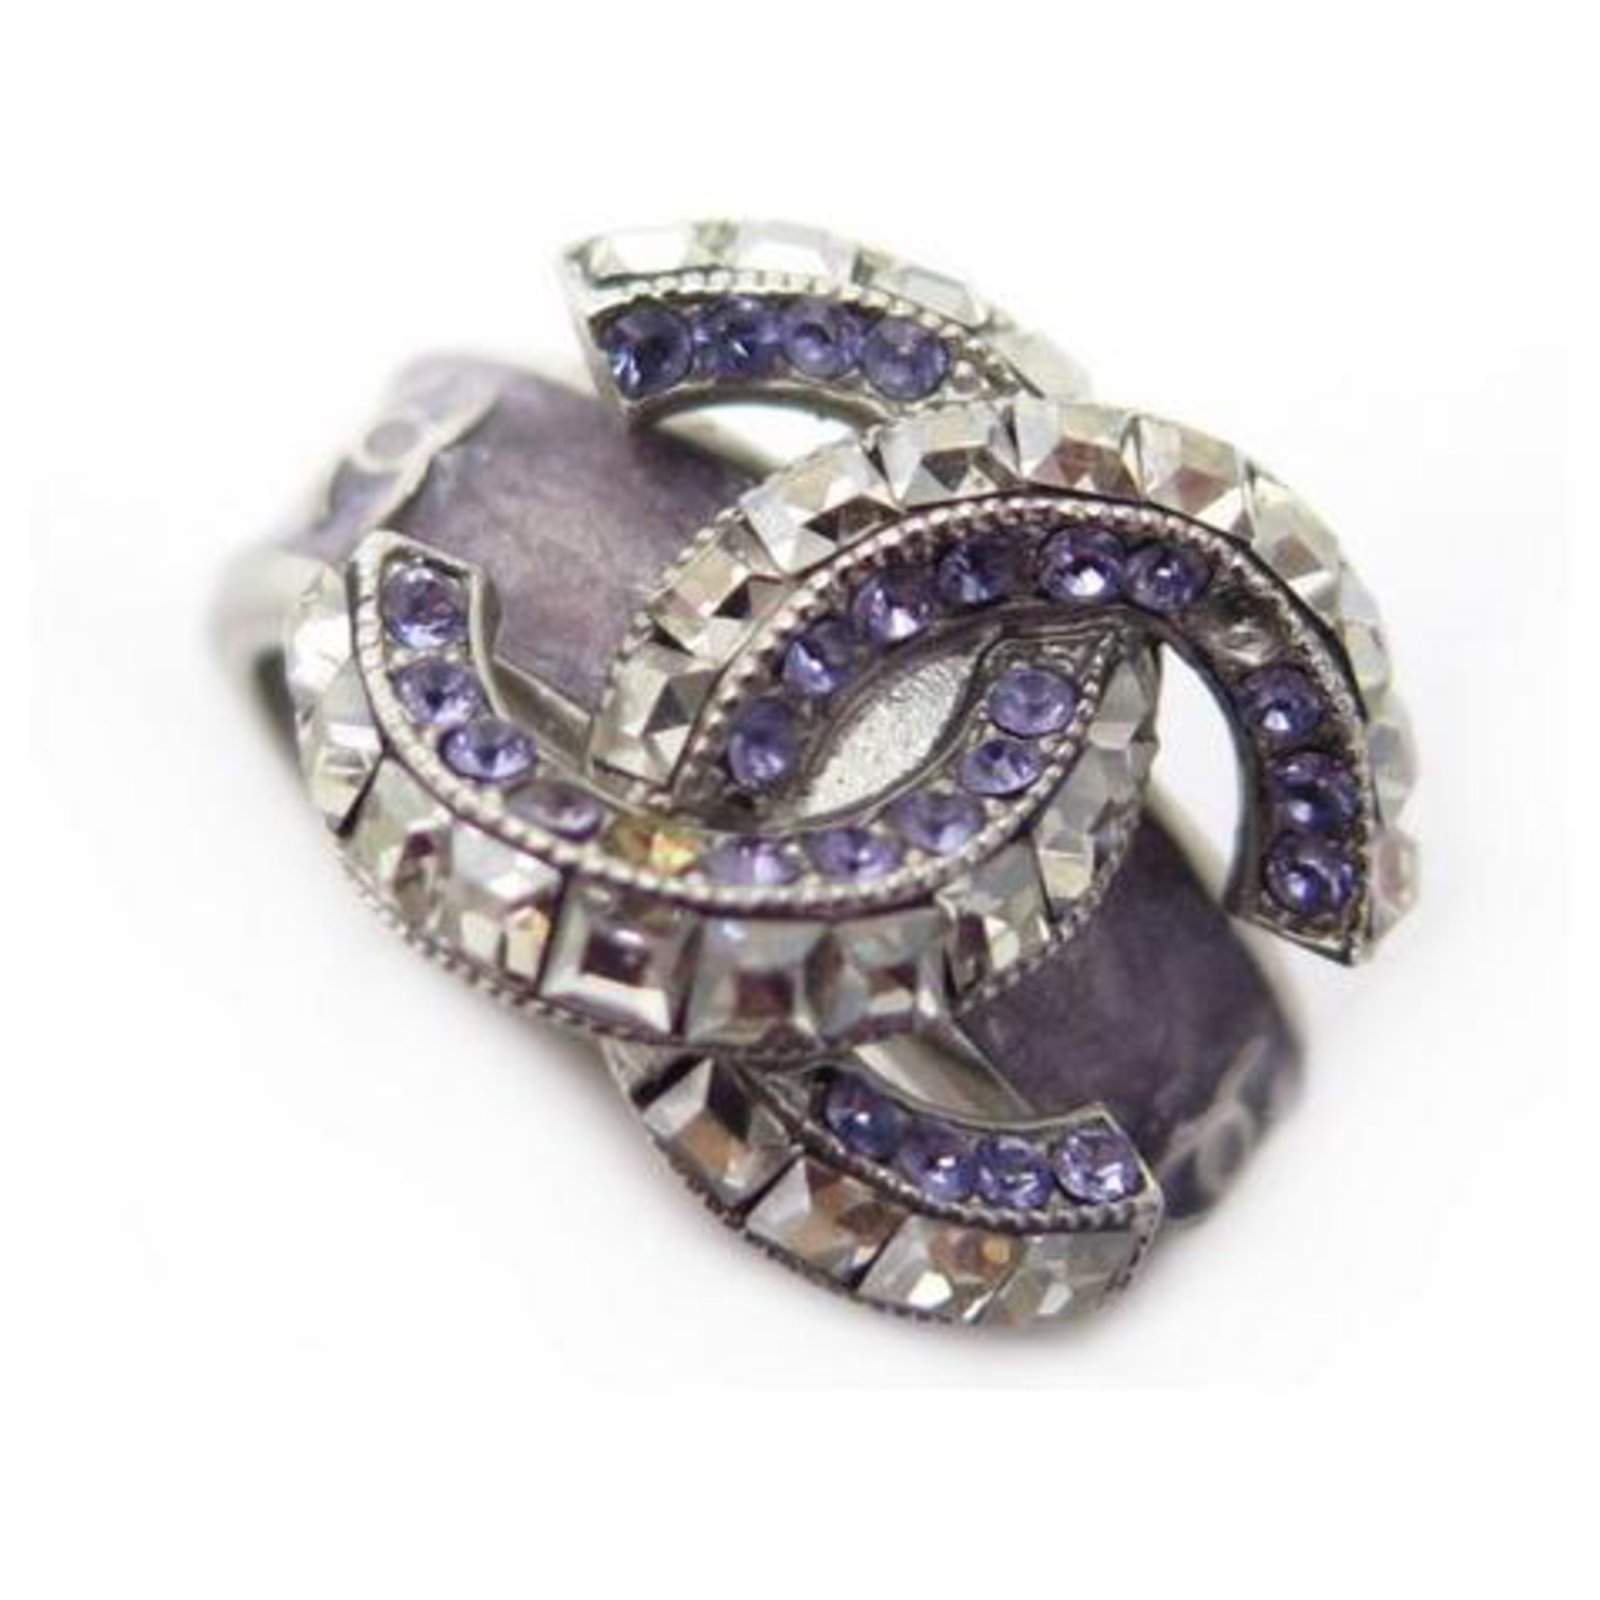 NEW CHANEL CC LOGO RING & PURPLE STRASS SIZE 54 SILVER METAL NEW